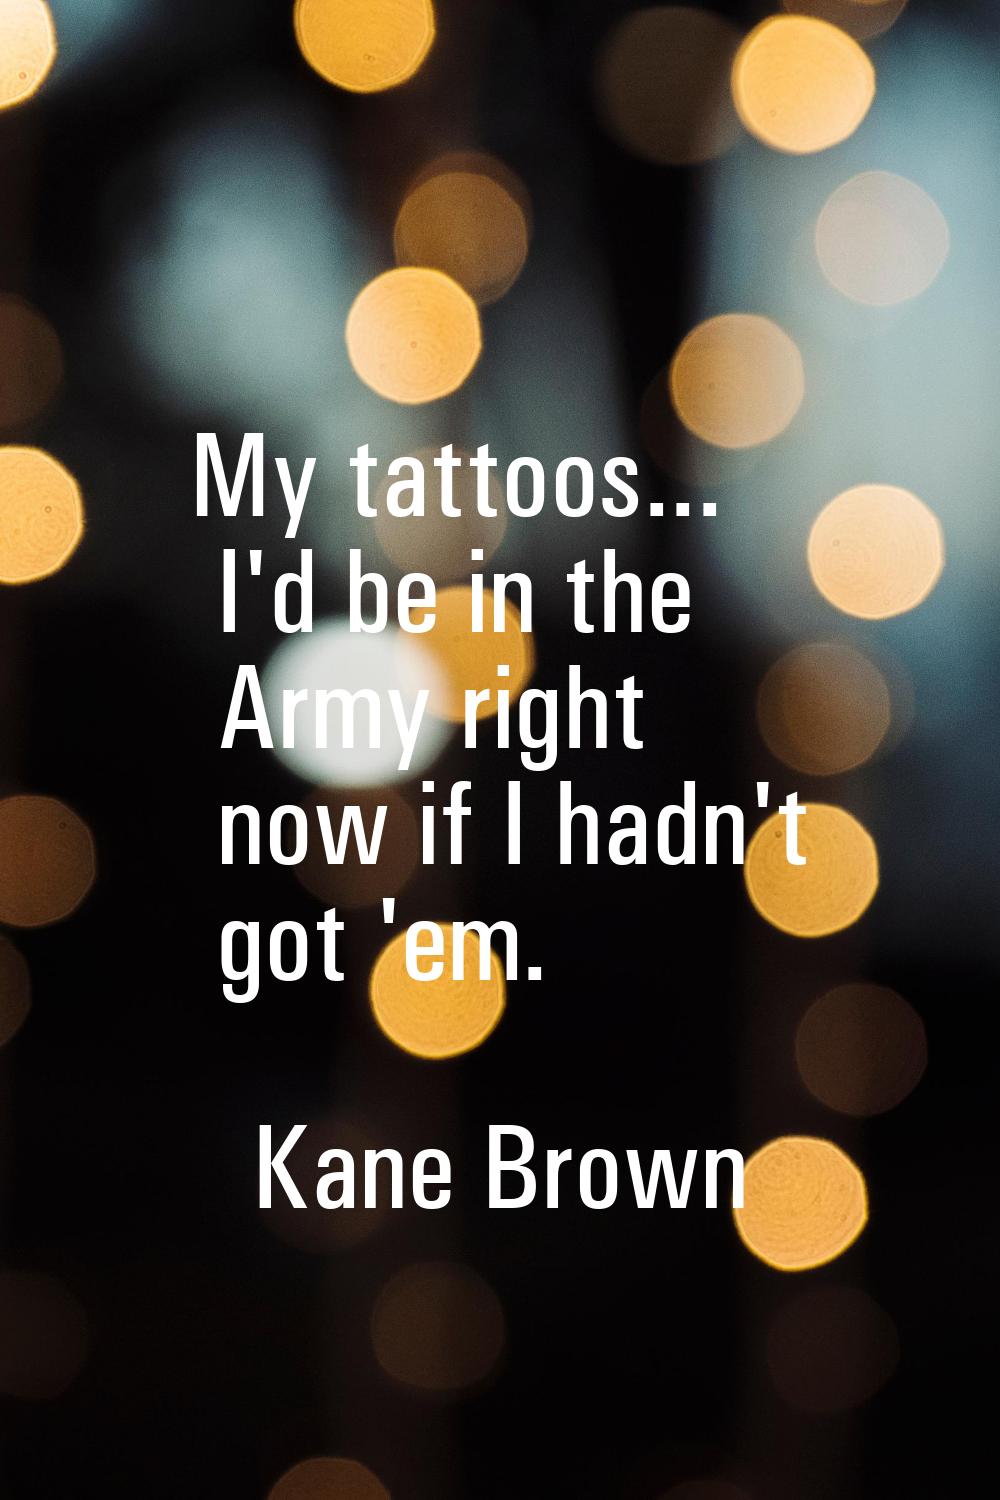 My tattoos... I'd be in the Army right now if I hadn't got 'em.